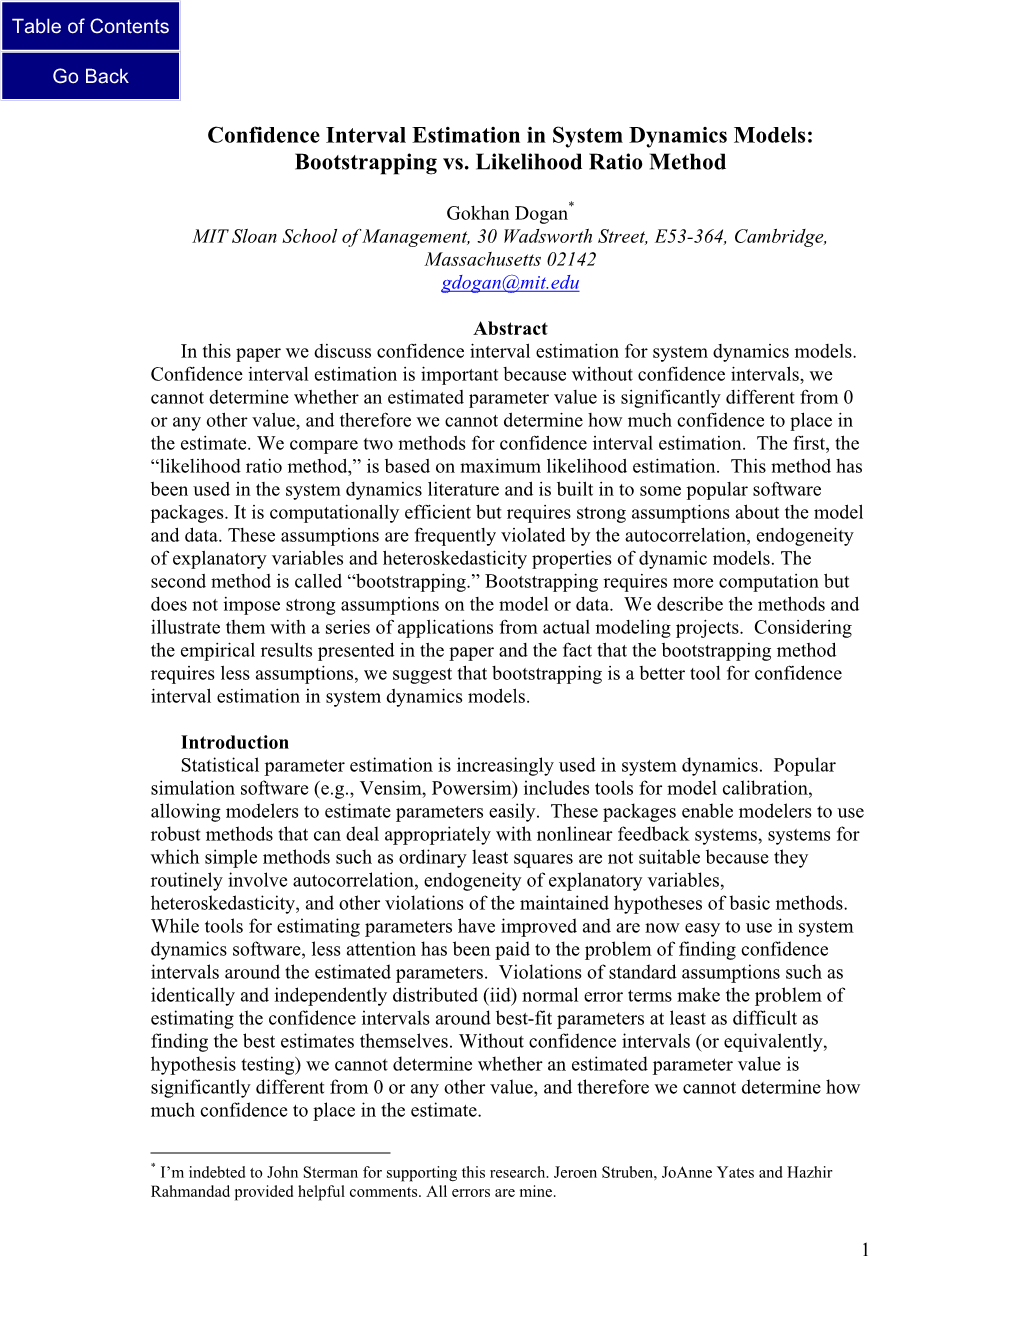 Confidence Interval Estimation in System Dynamics Models: Bootstrapping Vs